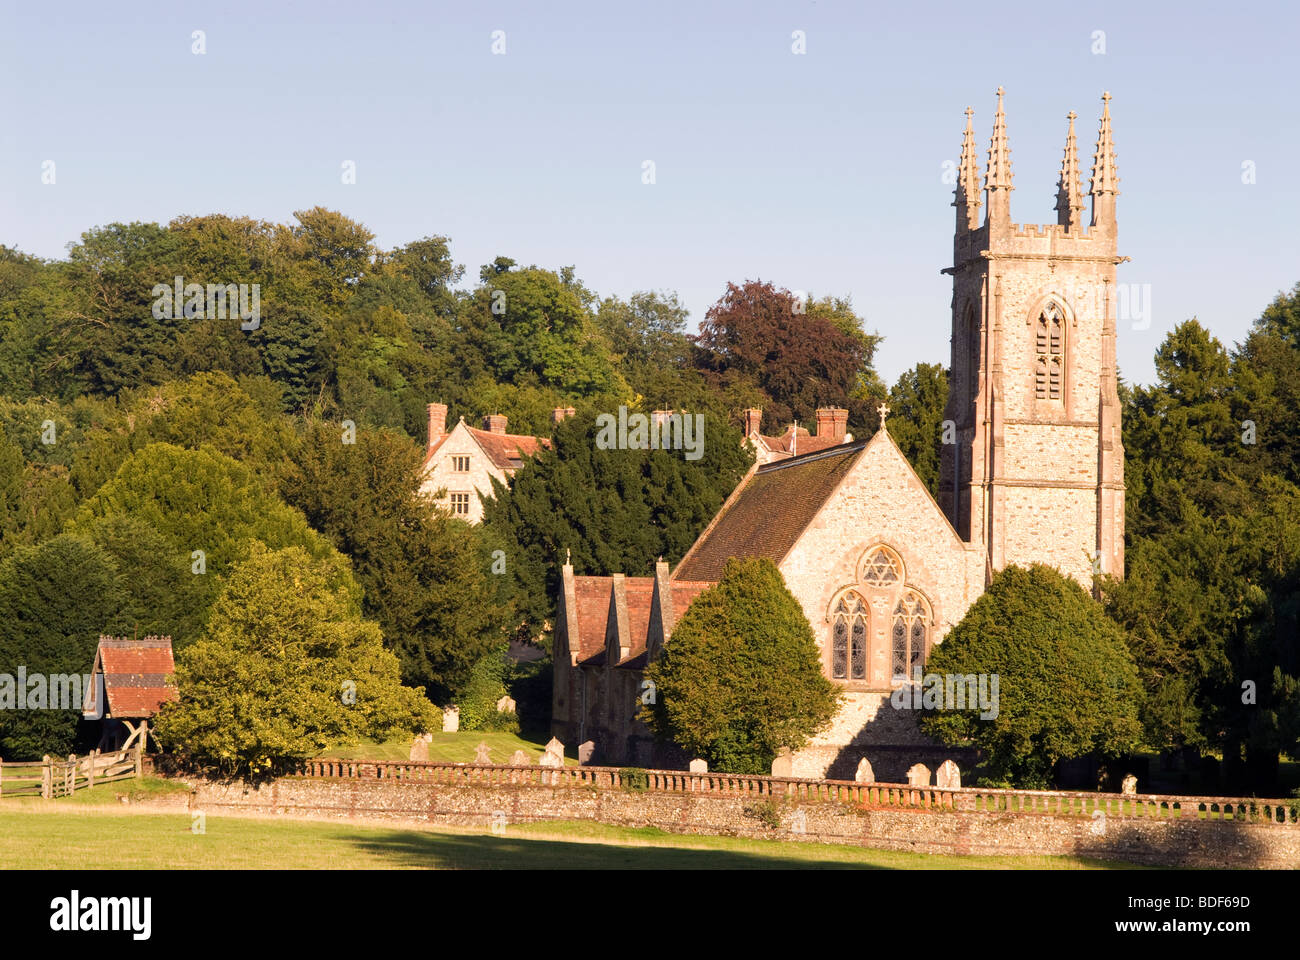 St Nicholas Church nestled between trees in the picturesque village of Chawton, near Alton, Hampshire, UK. Stock Photo